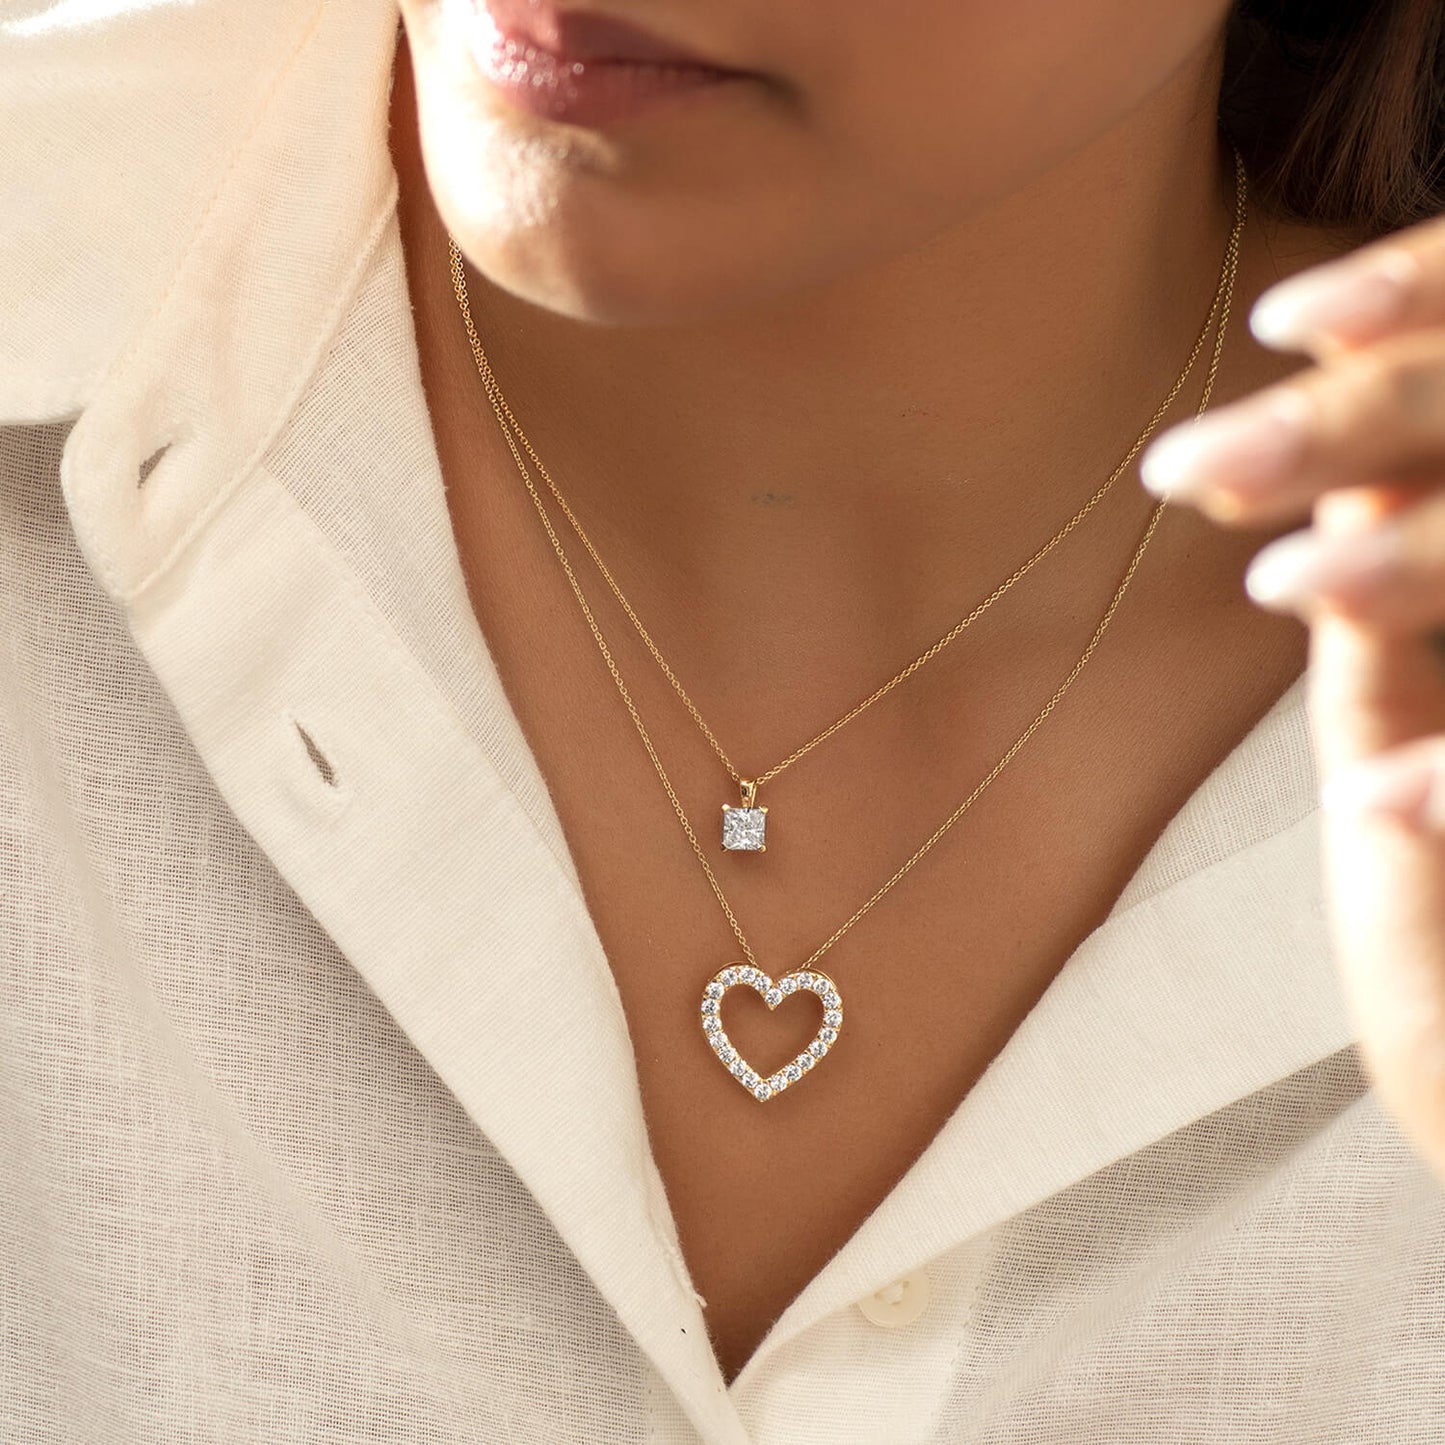 Atmos Heart Silhouette Necklace_Product Angle_Lifestyle Image